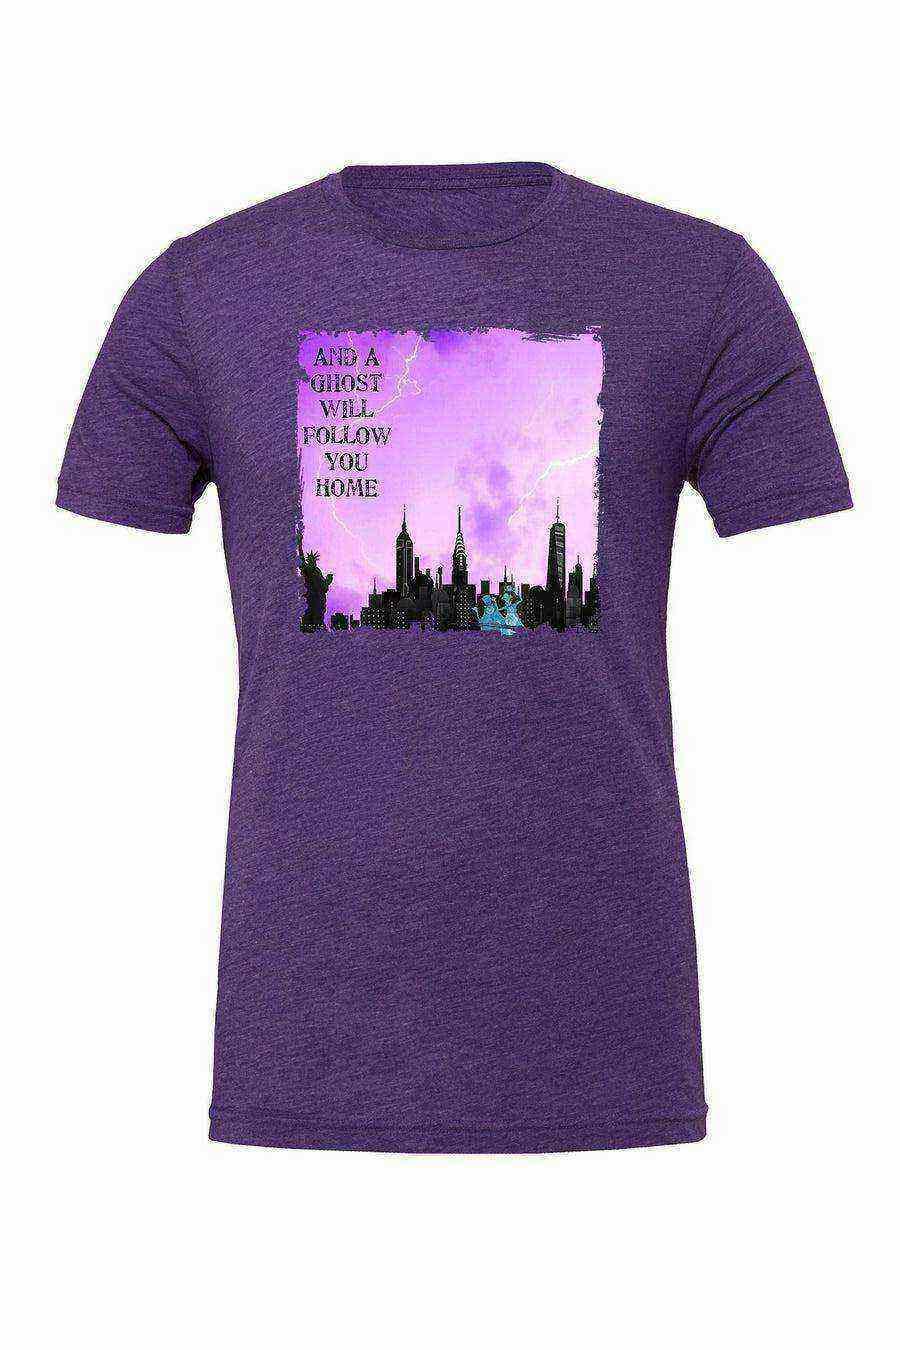 Youth | A Ghost Will Follow You Home (New York) Shirt | Haunted Mansion Shirt - Dylan's Tees